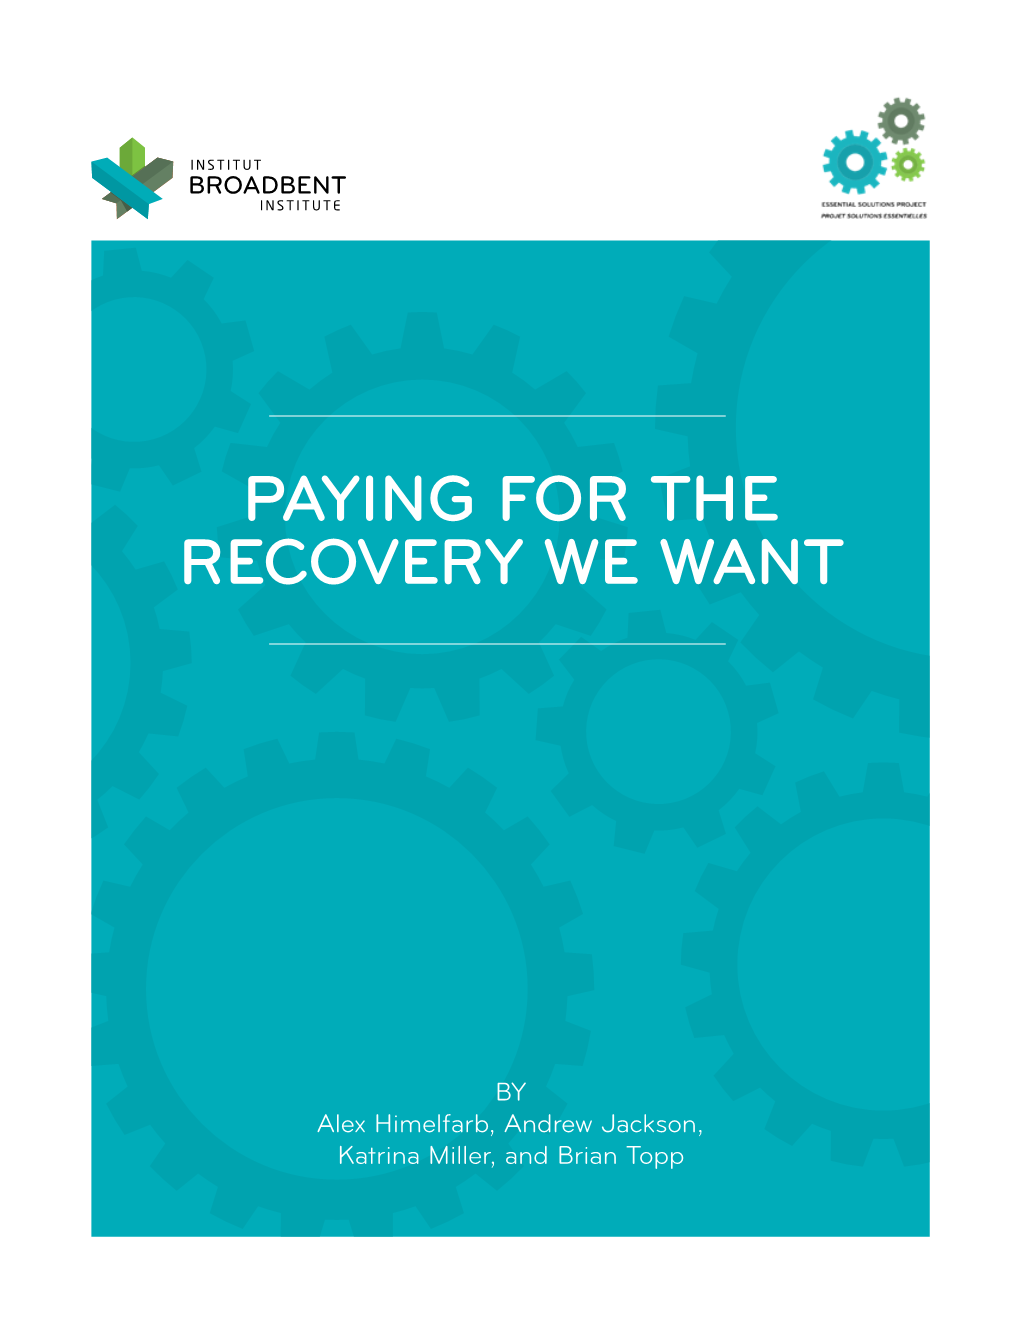 Paying for the Recovery We Want